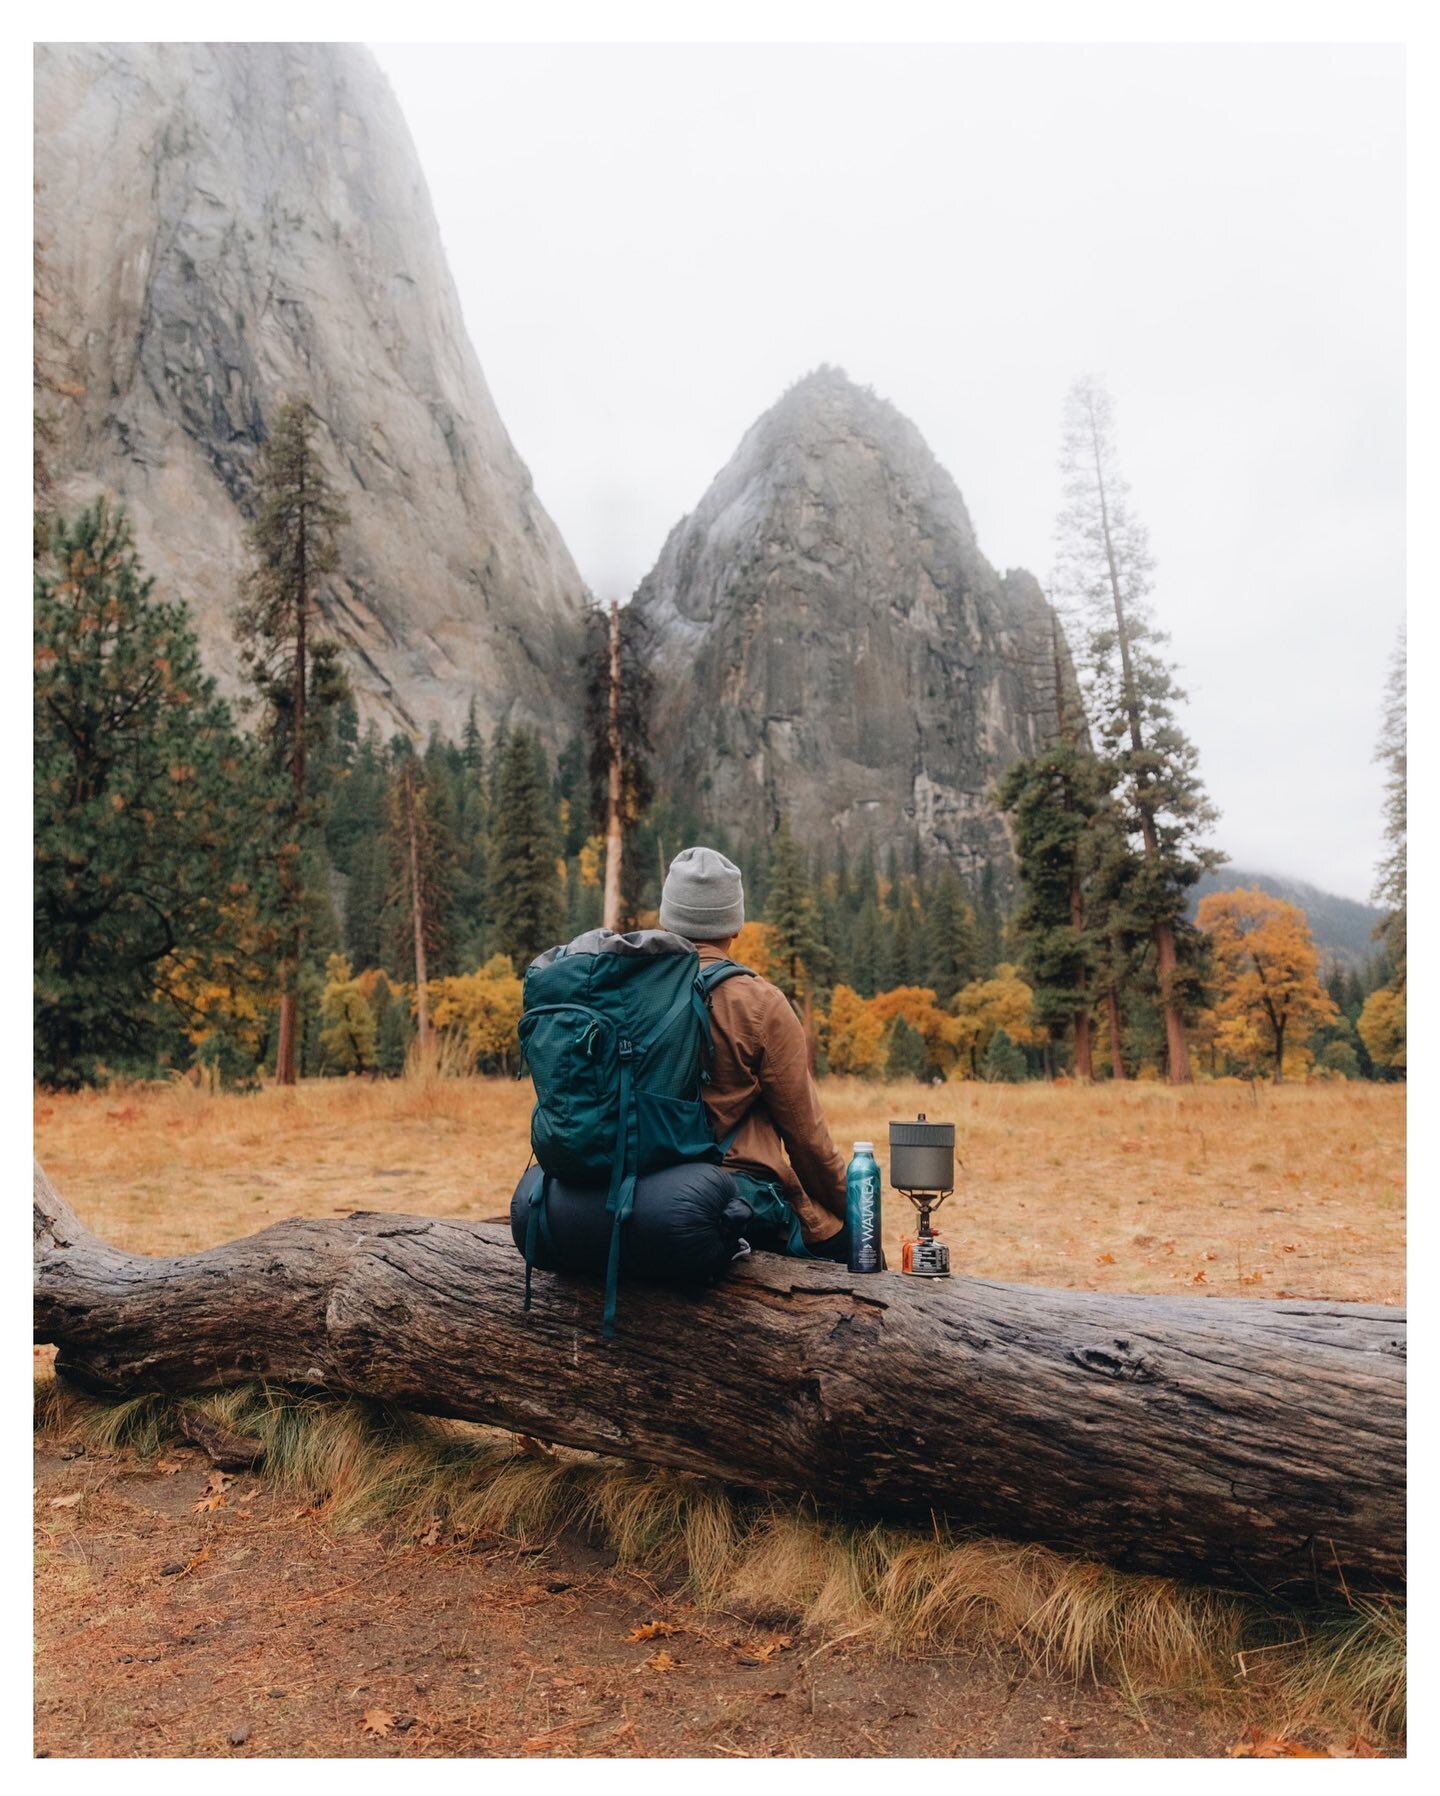 For our trip into Yosemite, @waiakea kept us hydrated with their healthy, sustainable, and ethical water. The refillable aluminum bottles paired with the Pahu Nui boxed water made for the perfect combo to fuel all of our adventures.👌🏽#ad